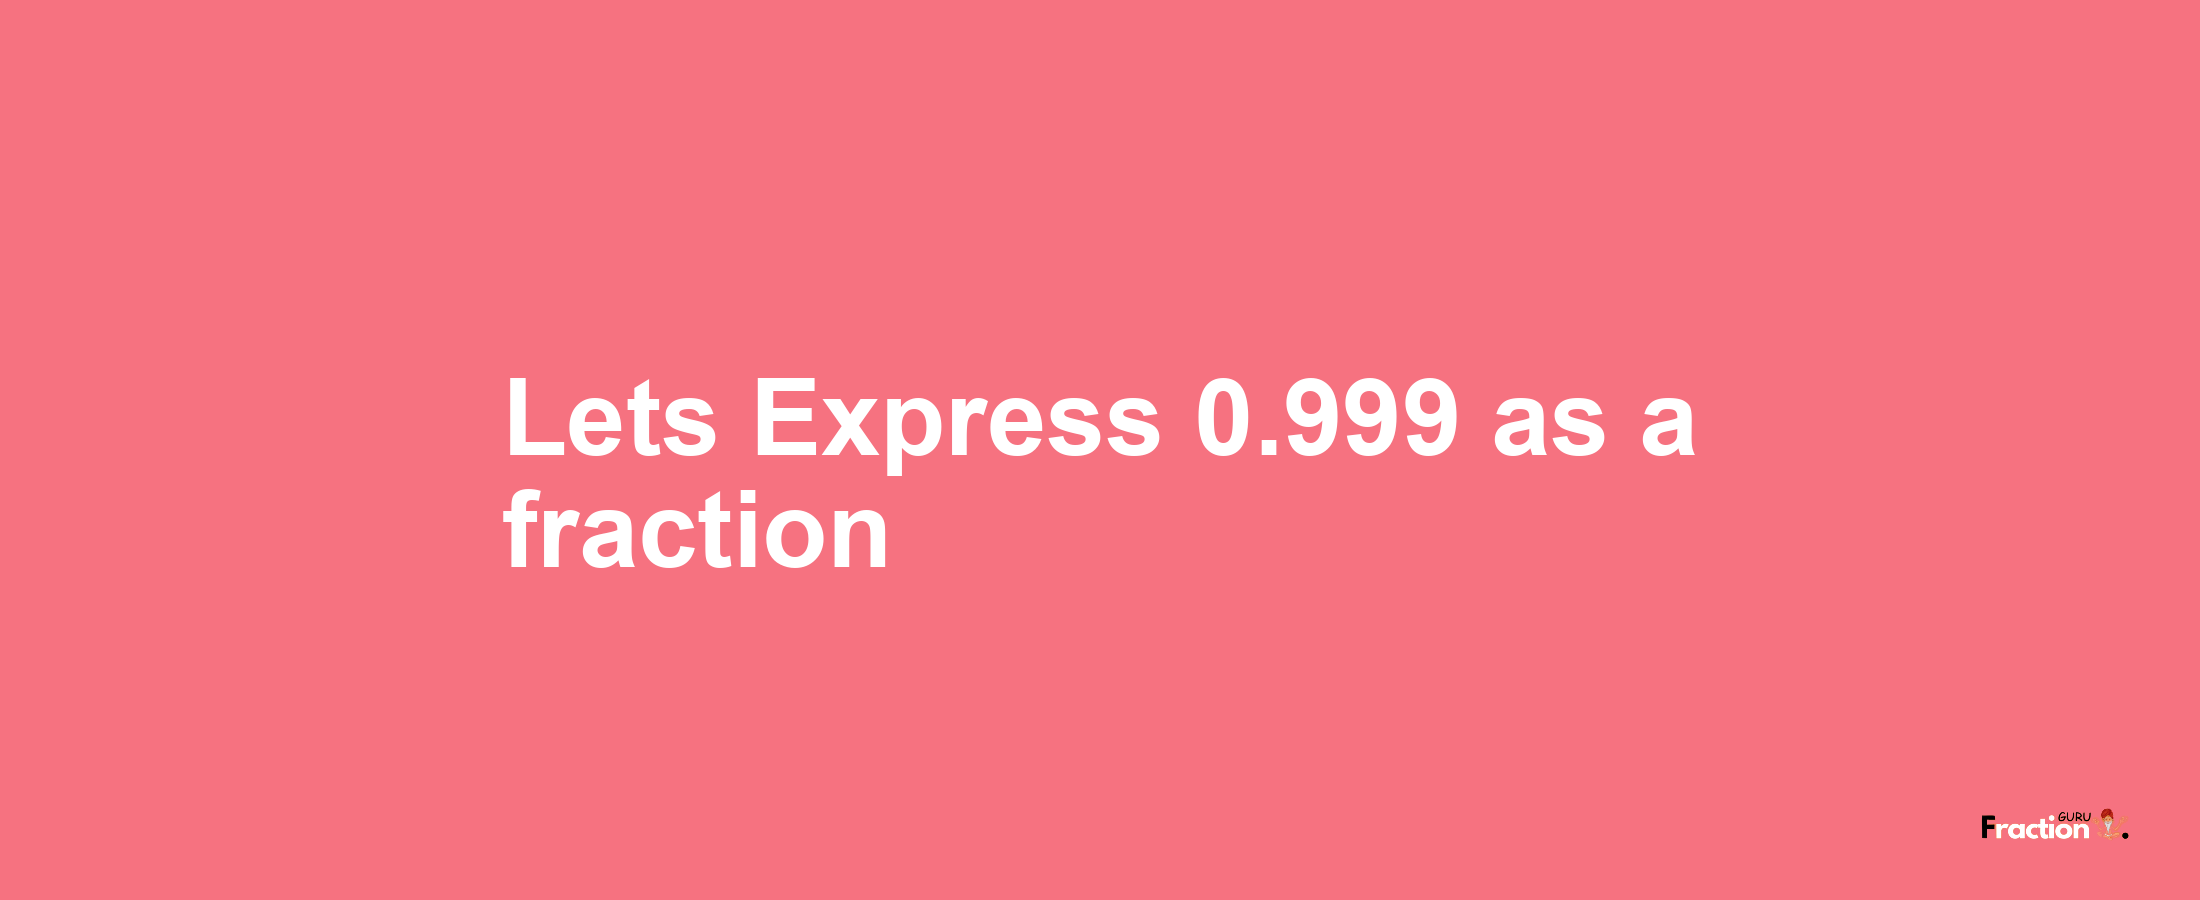 Lets Express 0.999 as afraction